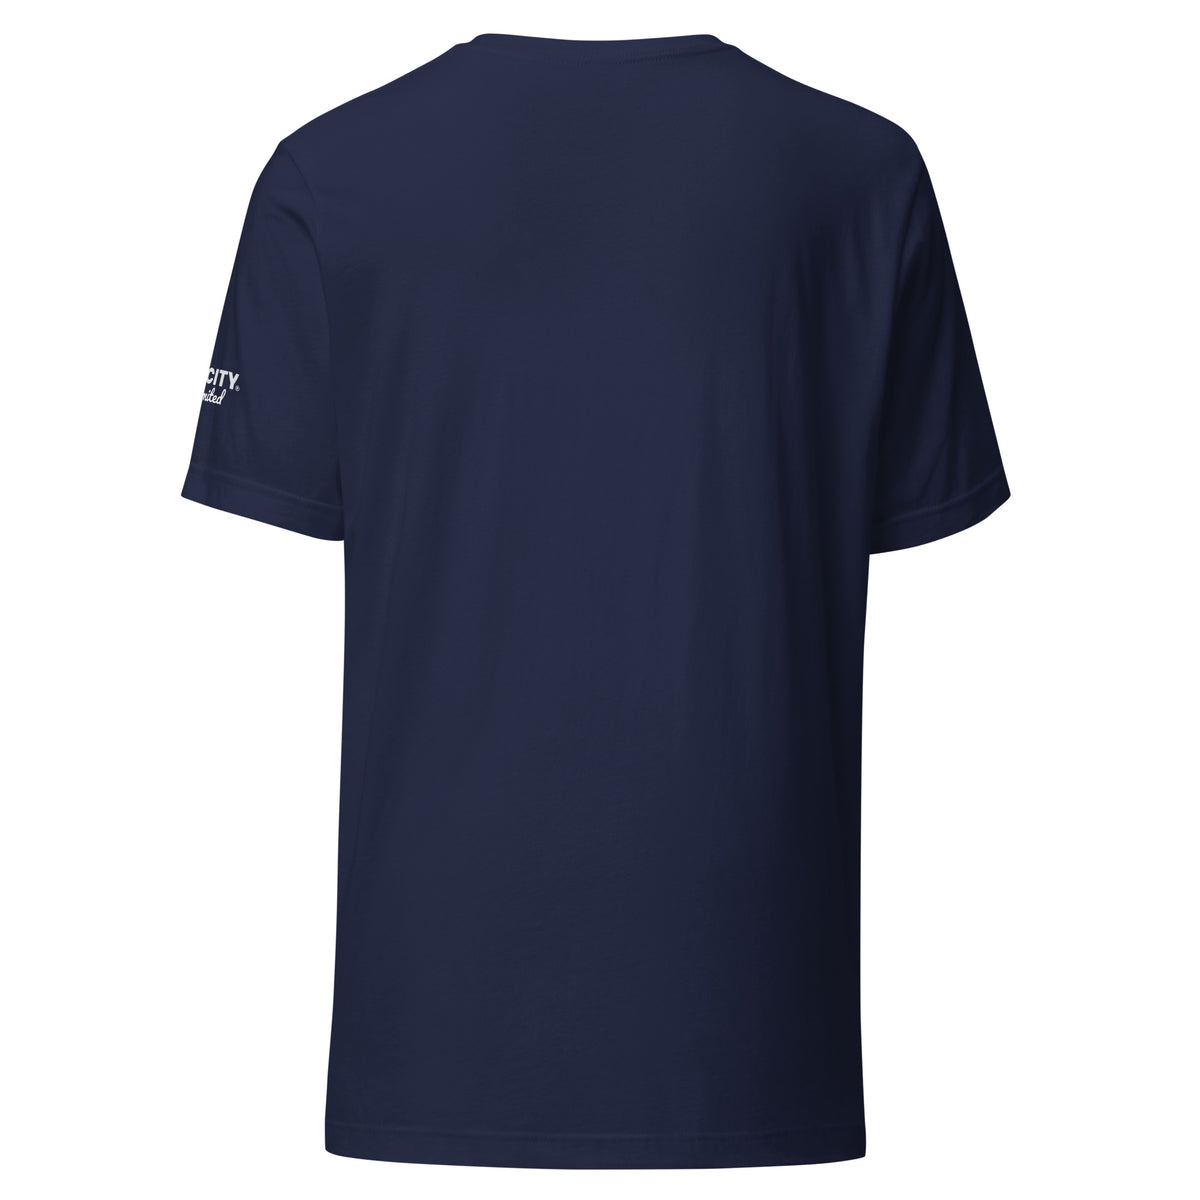 Varcity Unlimited Made Men Unisex Graphic T-Shirt Navy